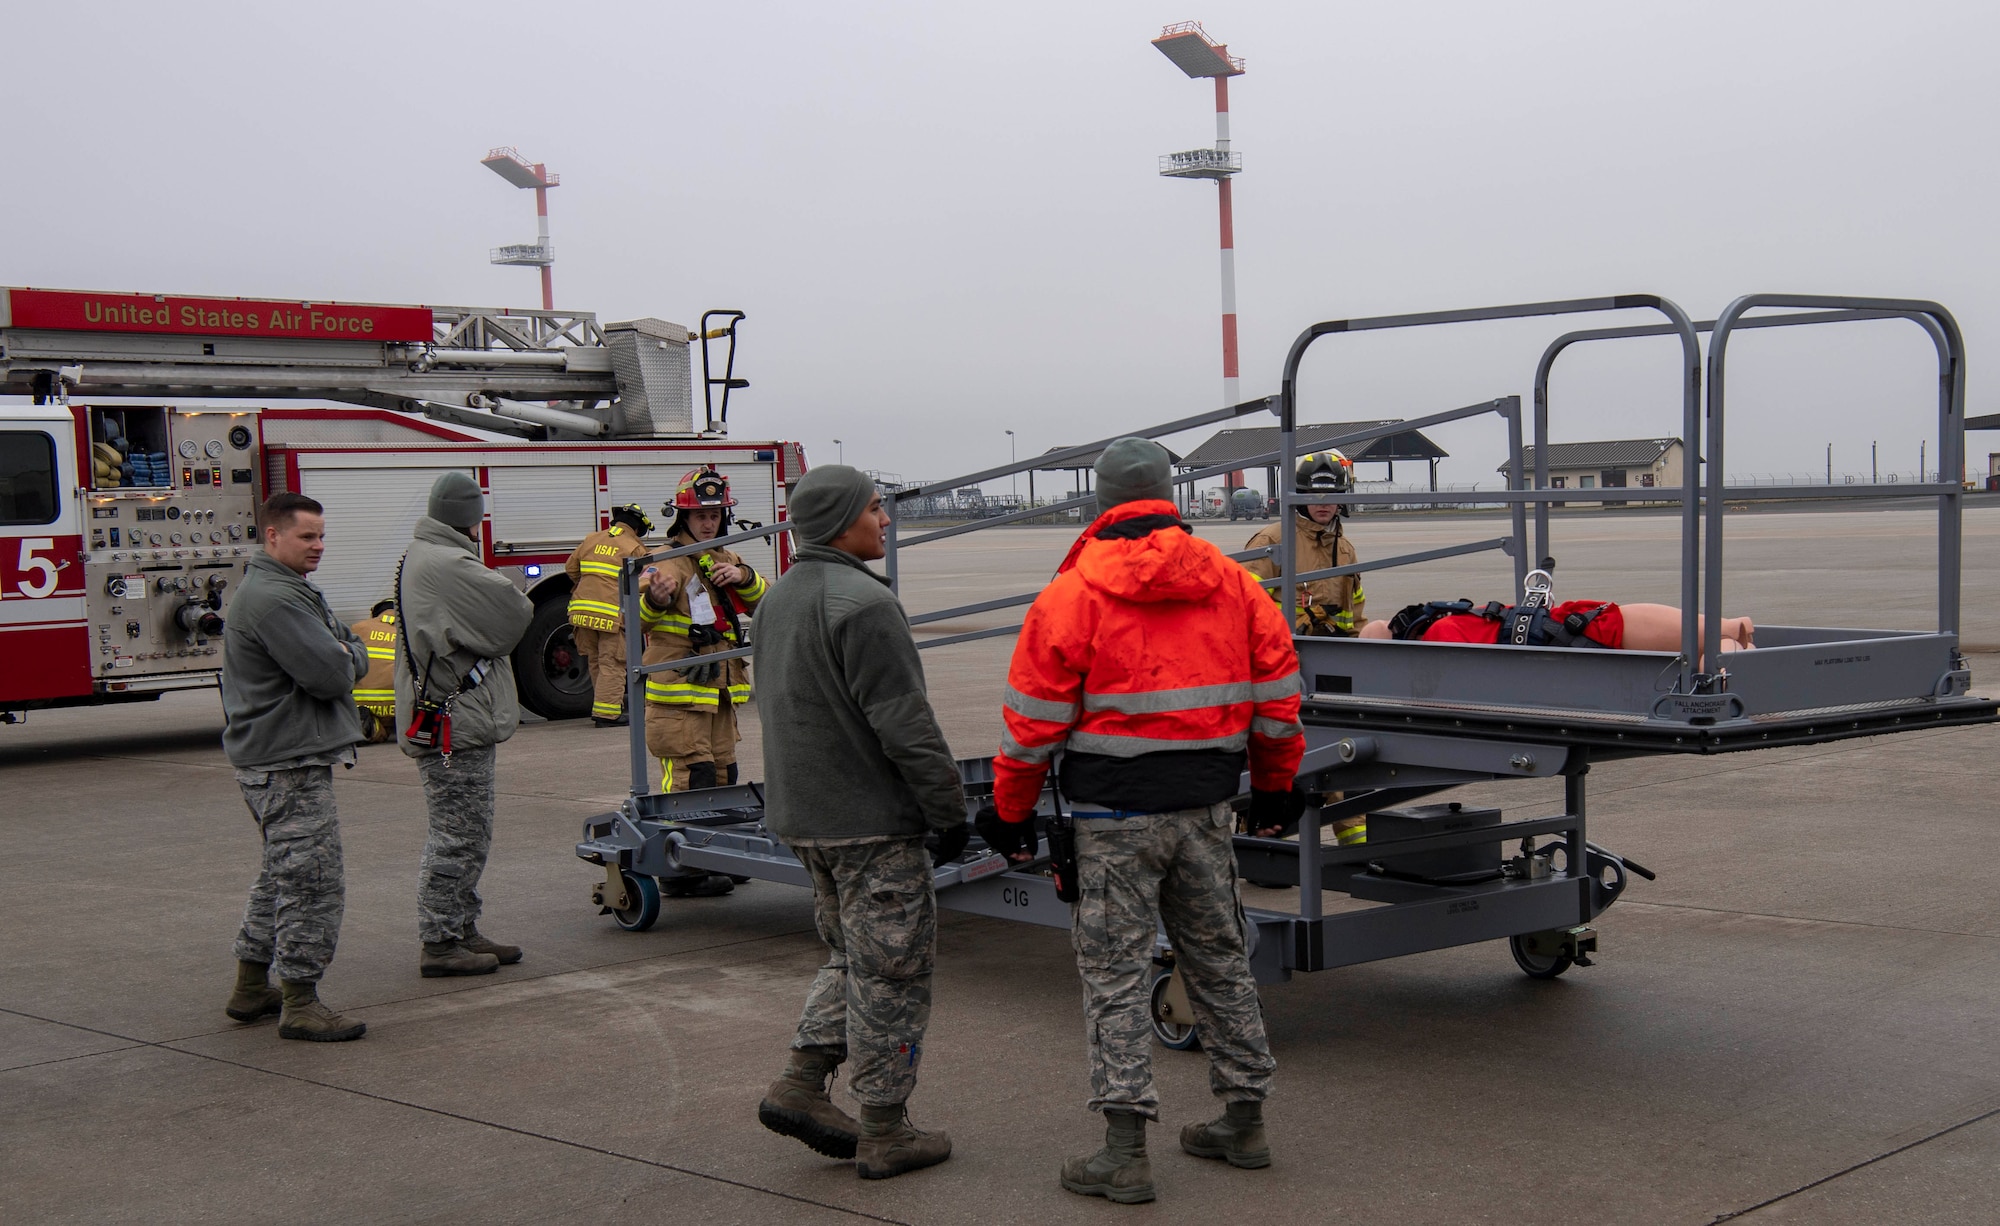 U.S. Air Force firefighters from the 52nd Civil Engineer Squadron arrive in response to a fall protection exercise at Spangdahlem Air Base, Germany, Jan. 23, 2020. The exercise was designed to help Airmen be better prepared to respond to life-threatening emergencies. (U.S. Air Force photo by Senior Airman Kyle Cope)